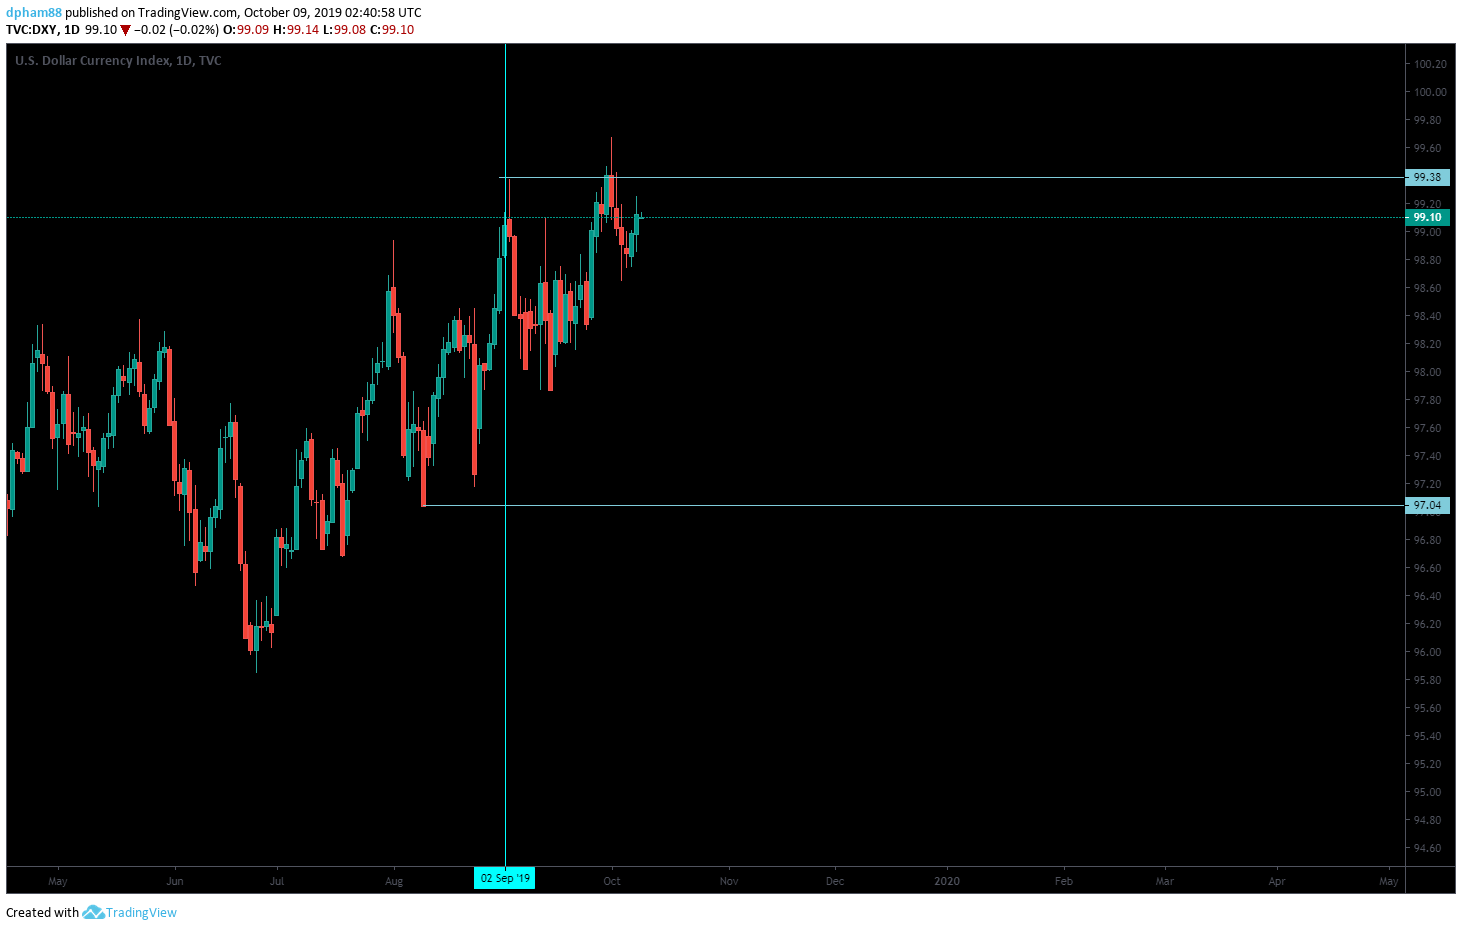 DXY tradingview.png